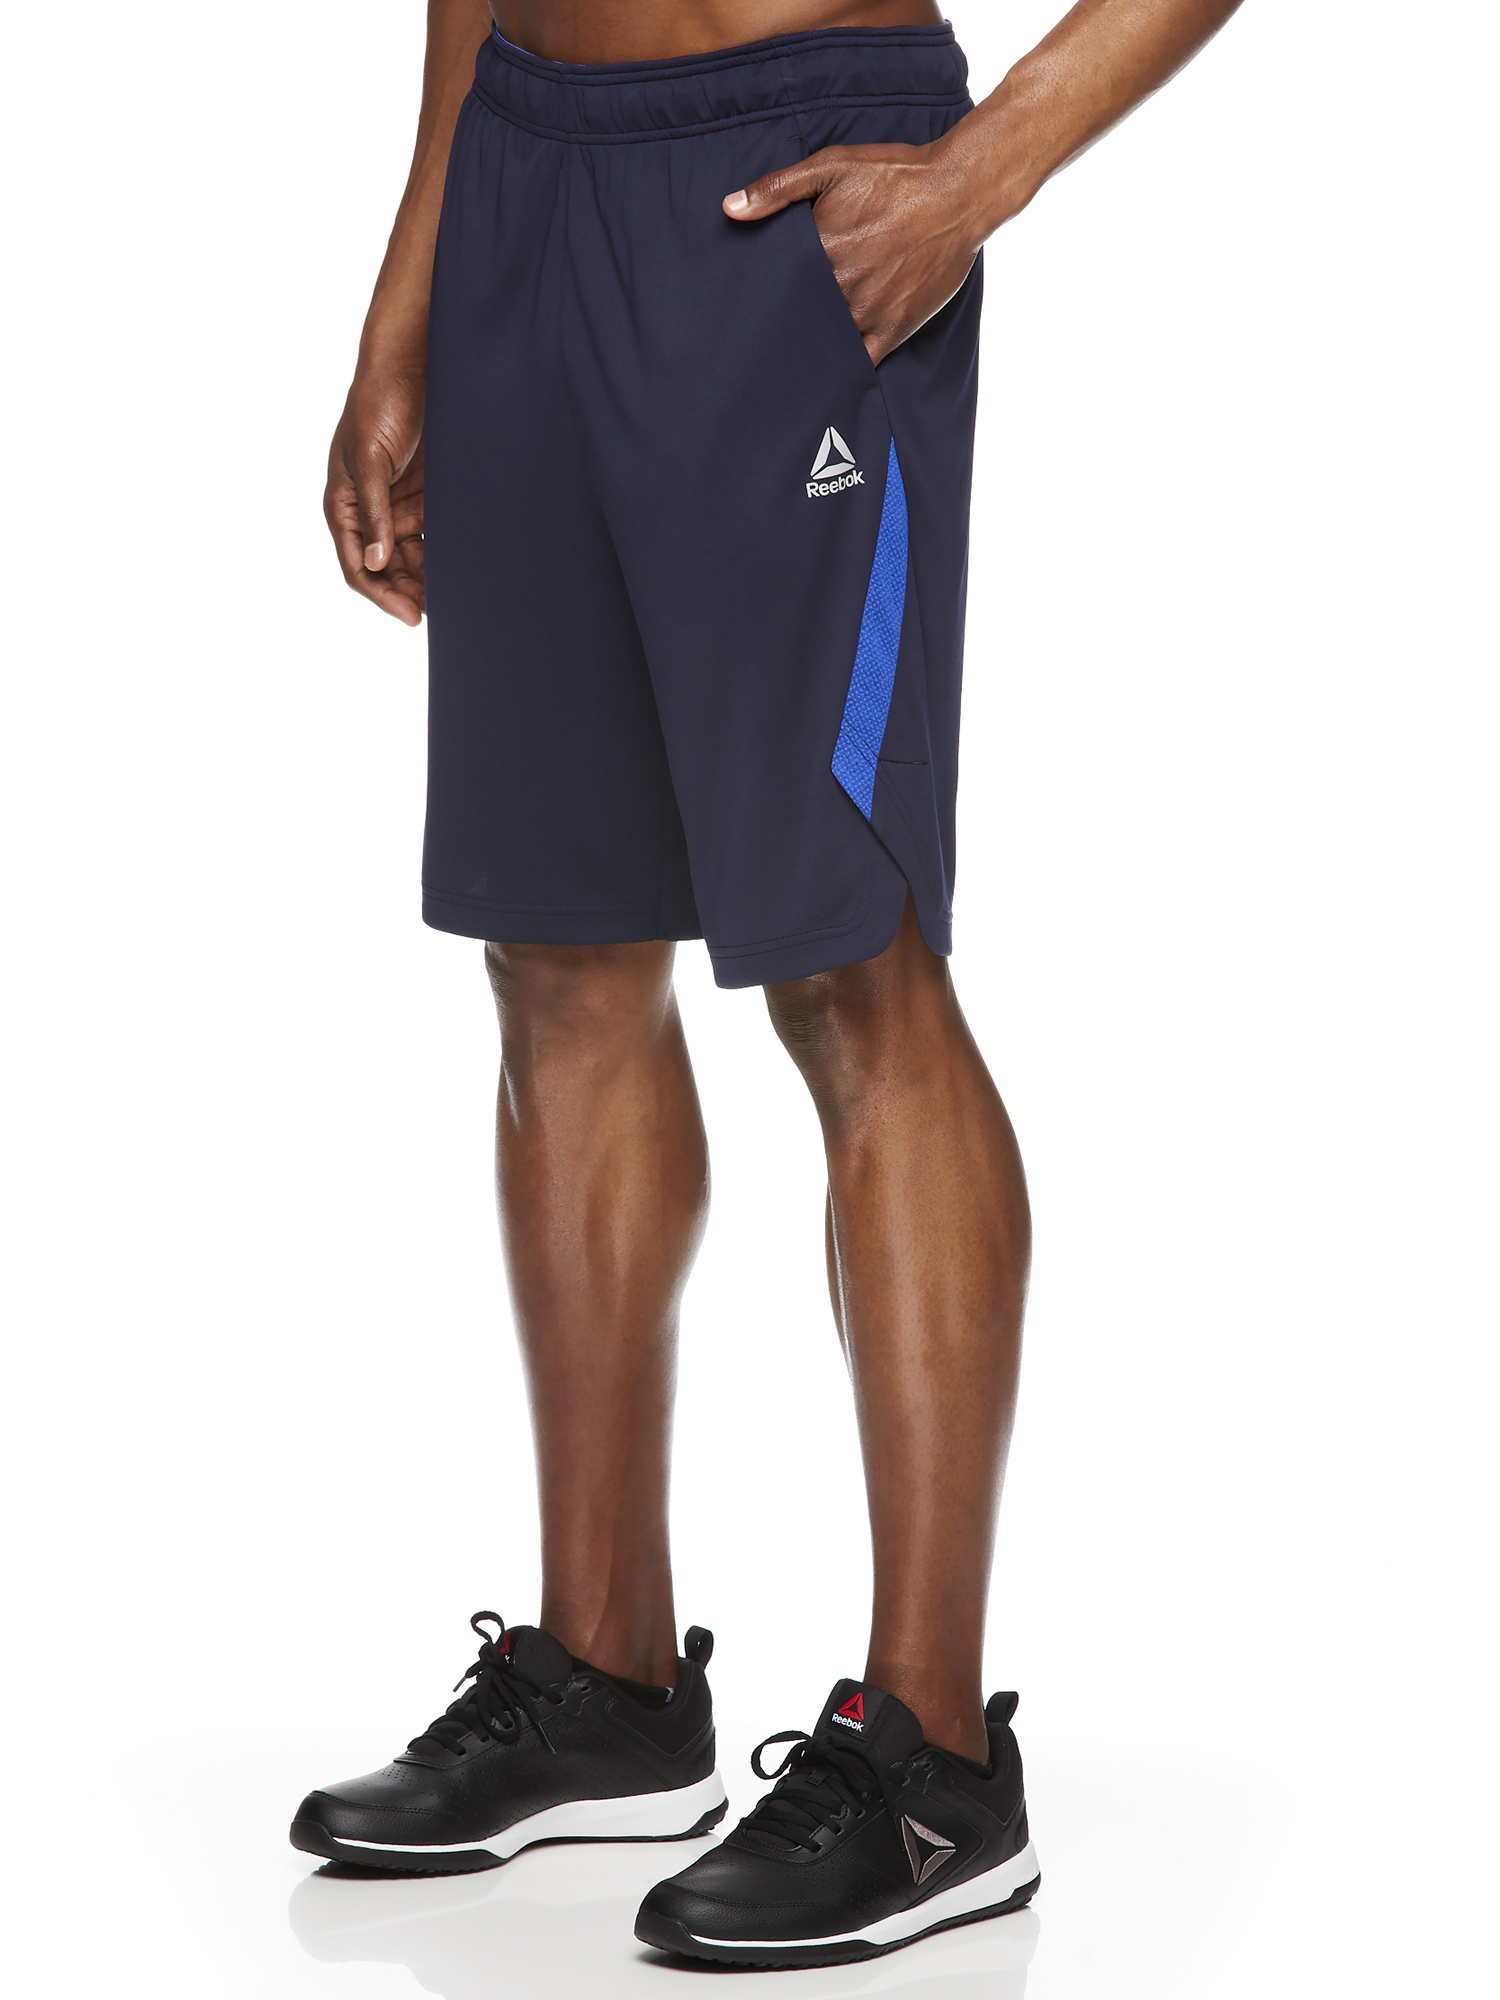 Reebok Men's and Big Men's 9" Free Weight Training Shorts, up to 5XL - image 1 of 4